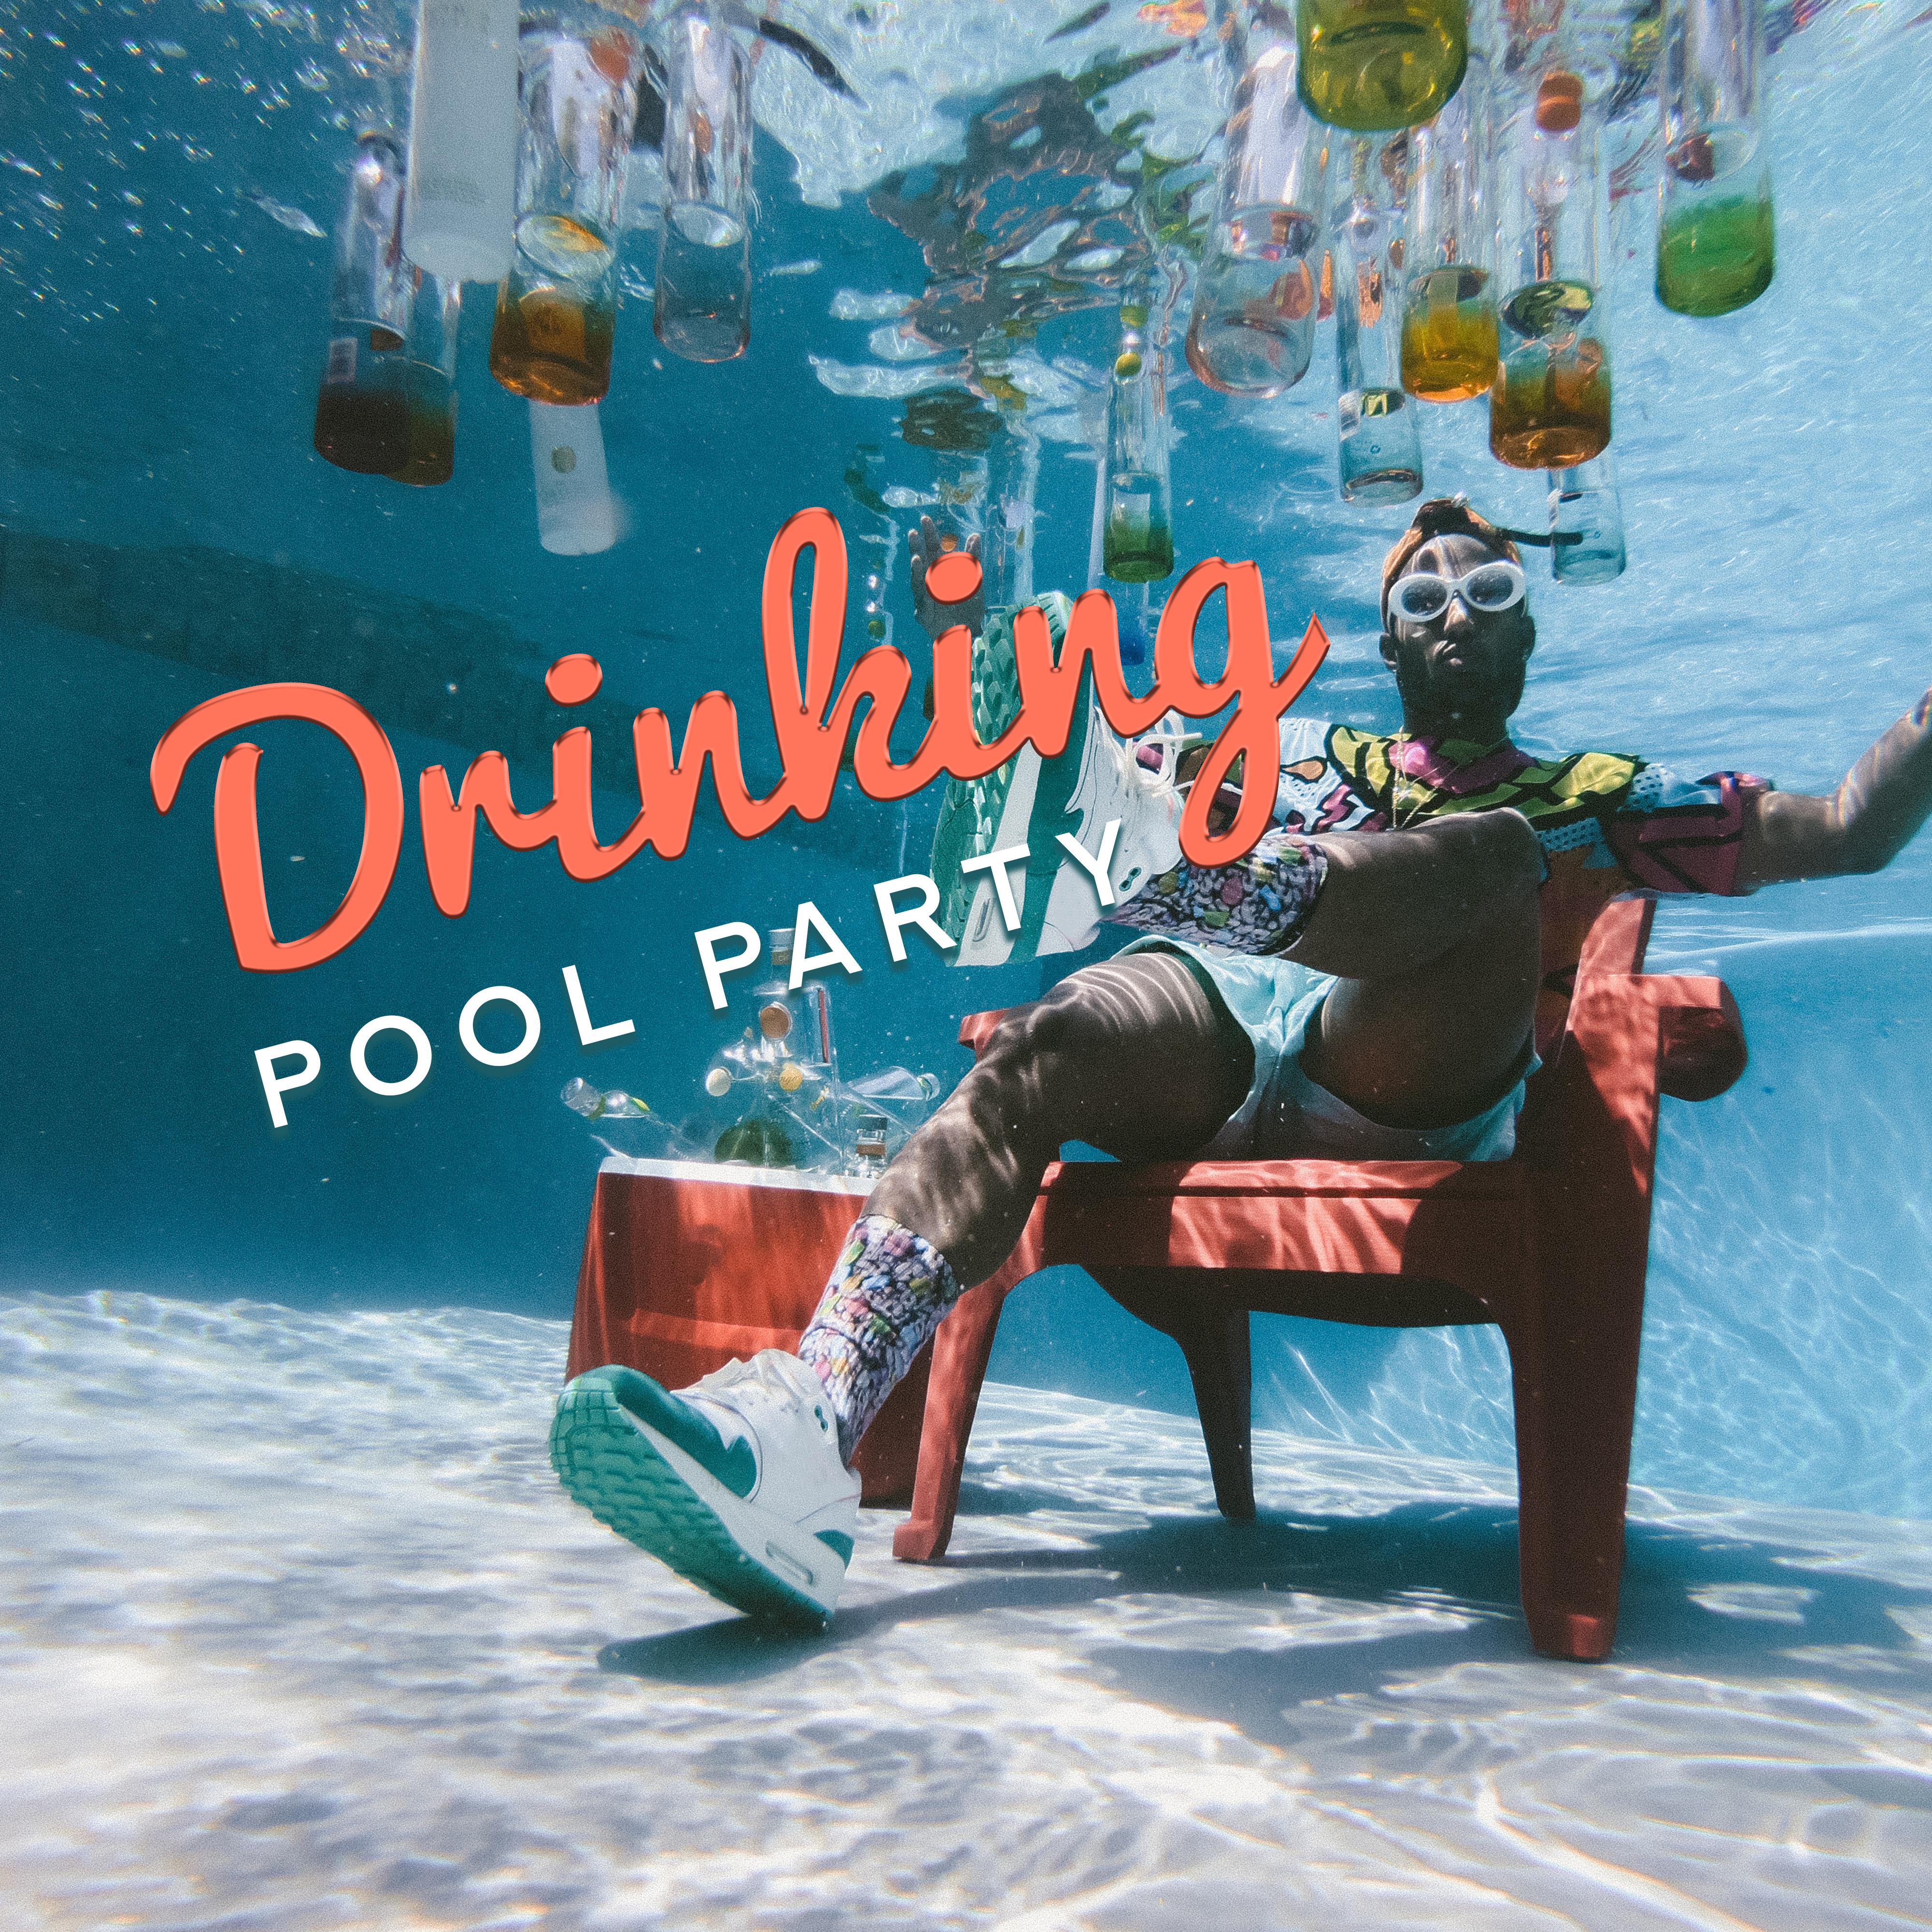 Drinking Pool Party: Essential Chillout Music for a Successful Party, Housewarming Party, Best Cocktail Party with Friends and Partying by the Pool